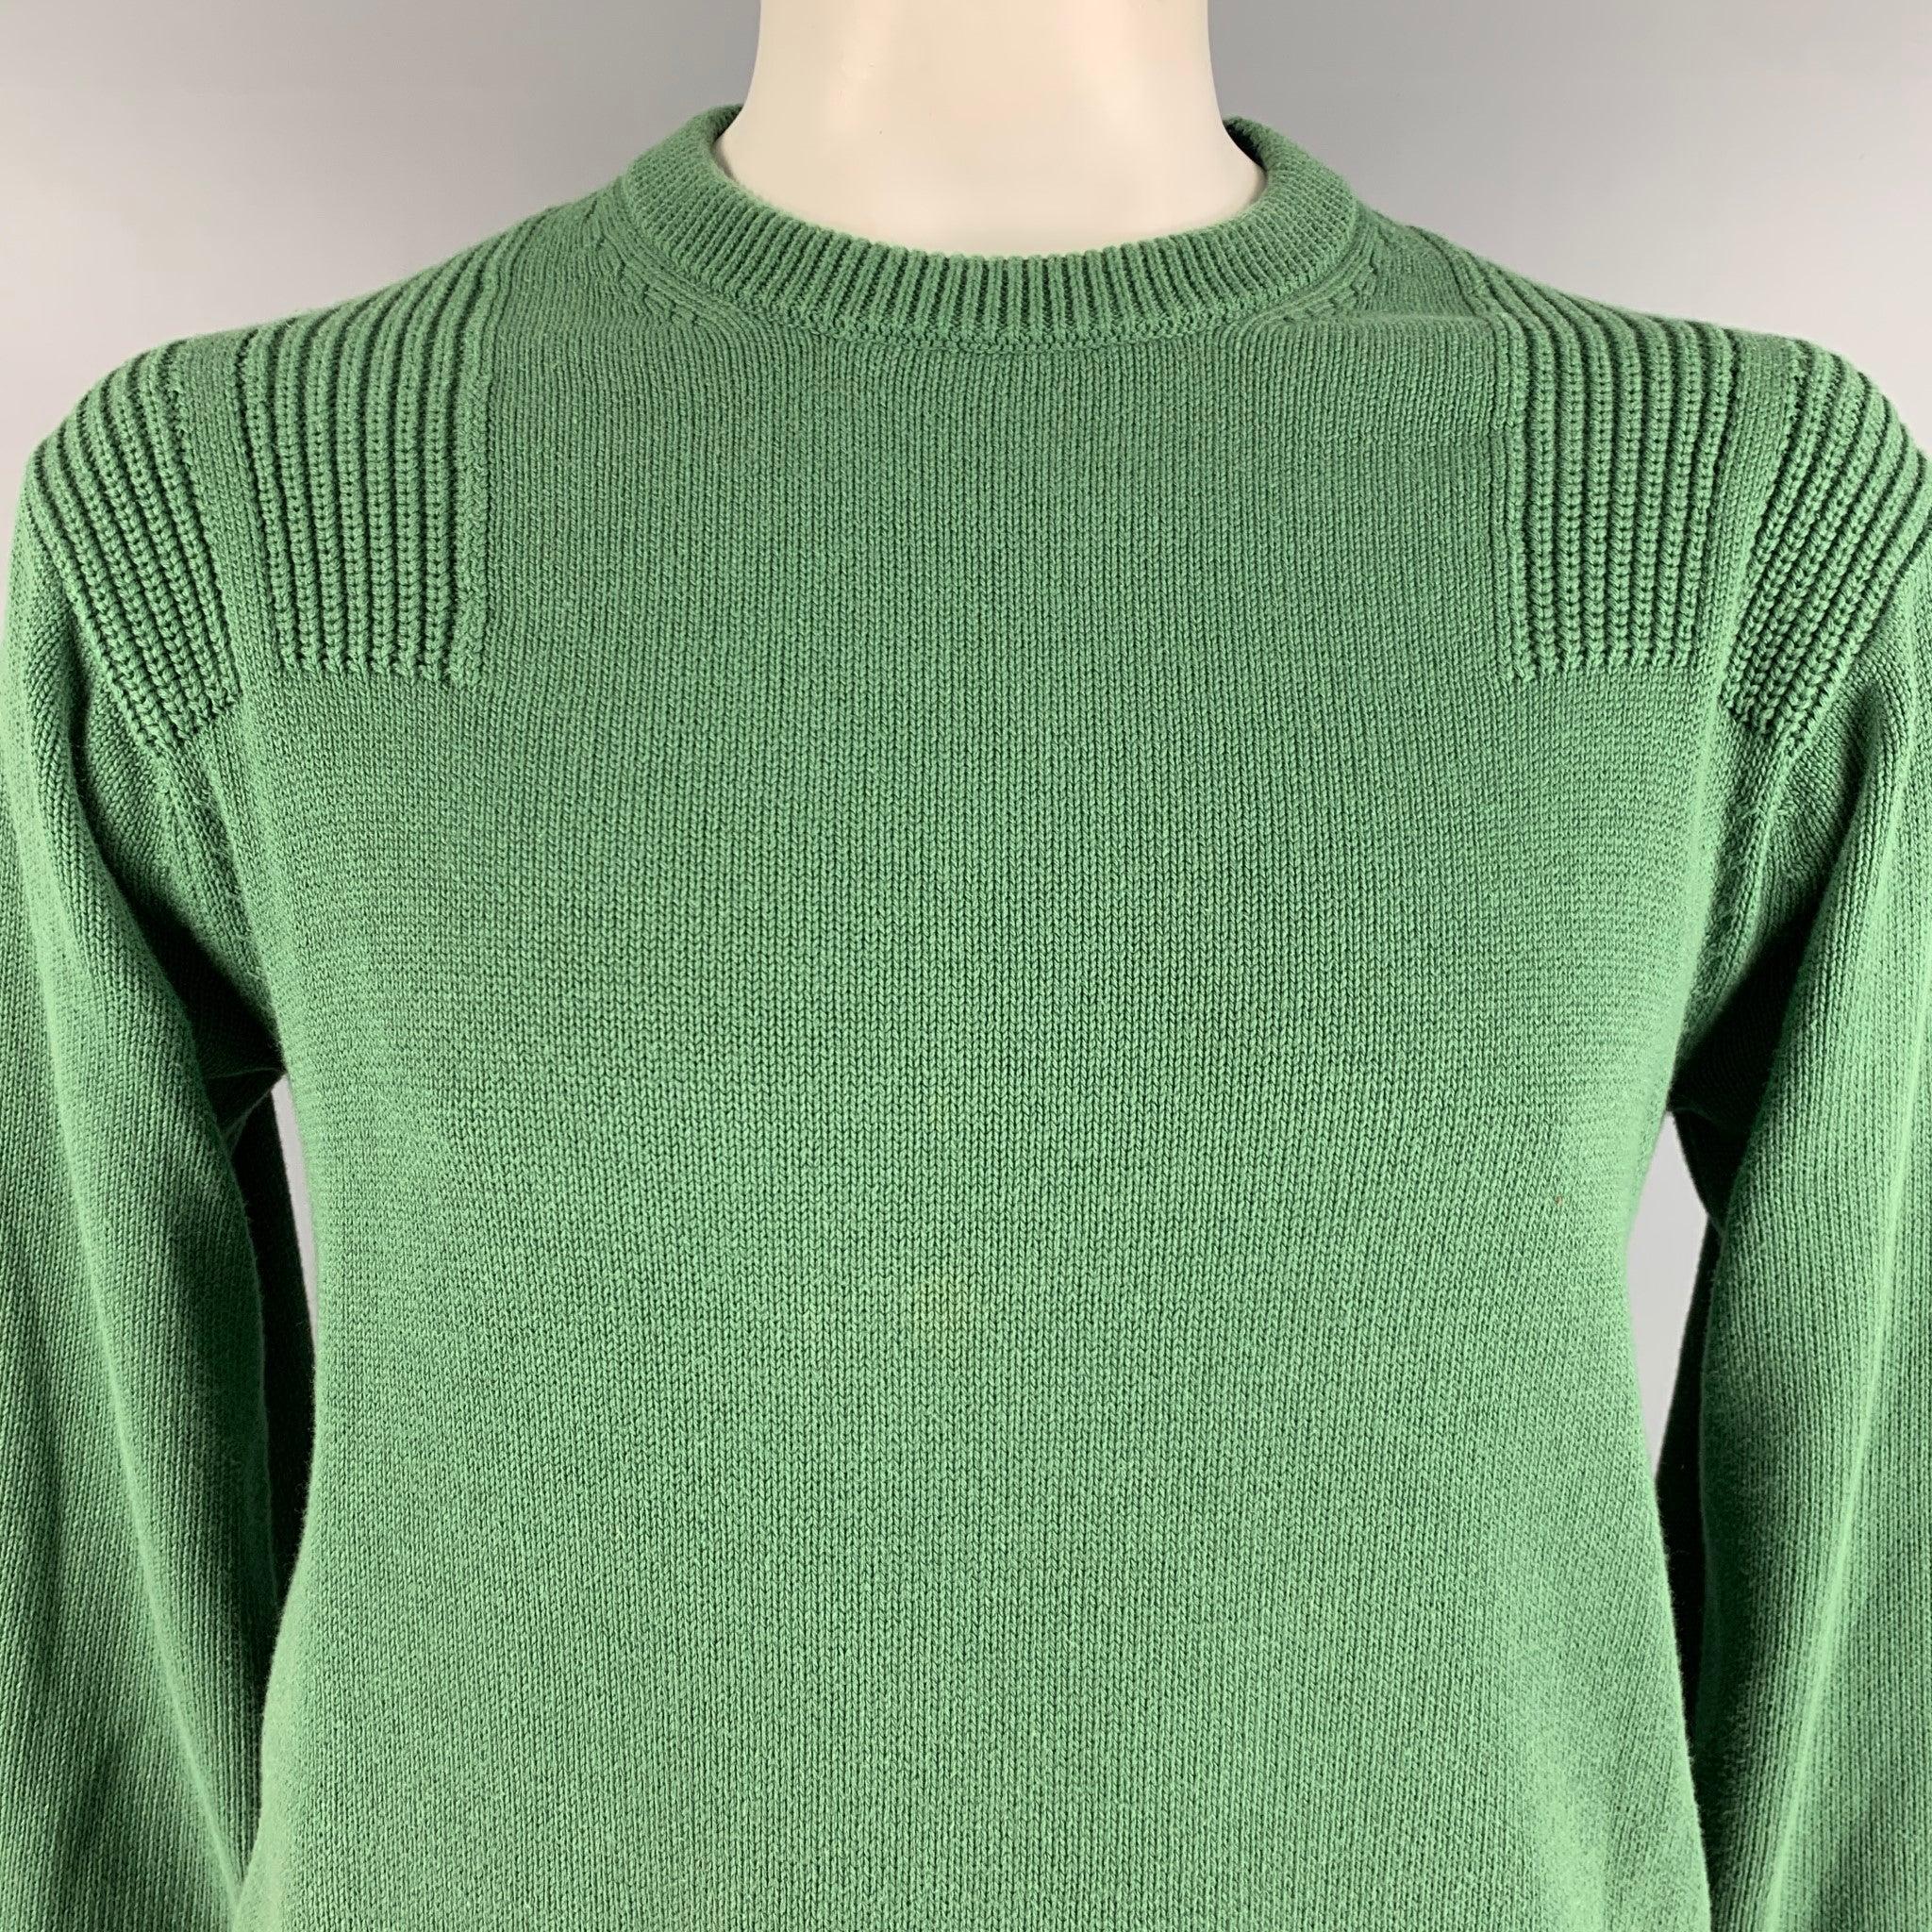 PS by PAUL SMITH
pullover in a green cotton knit fabric featuring contrasting shoulder knit technique, slit pockets, and crew neck.Very Good Pre-Owned Condition. Minor signs of wear. 

Marked:   M 

Measurements: 
 
Shoulder: 19 inches Chest: 40